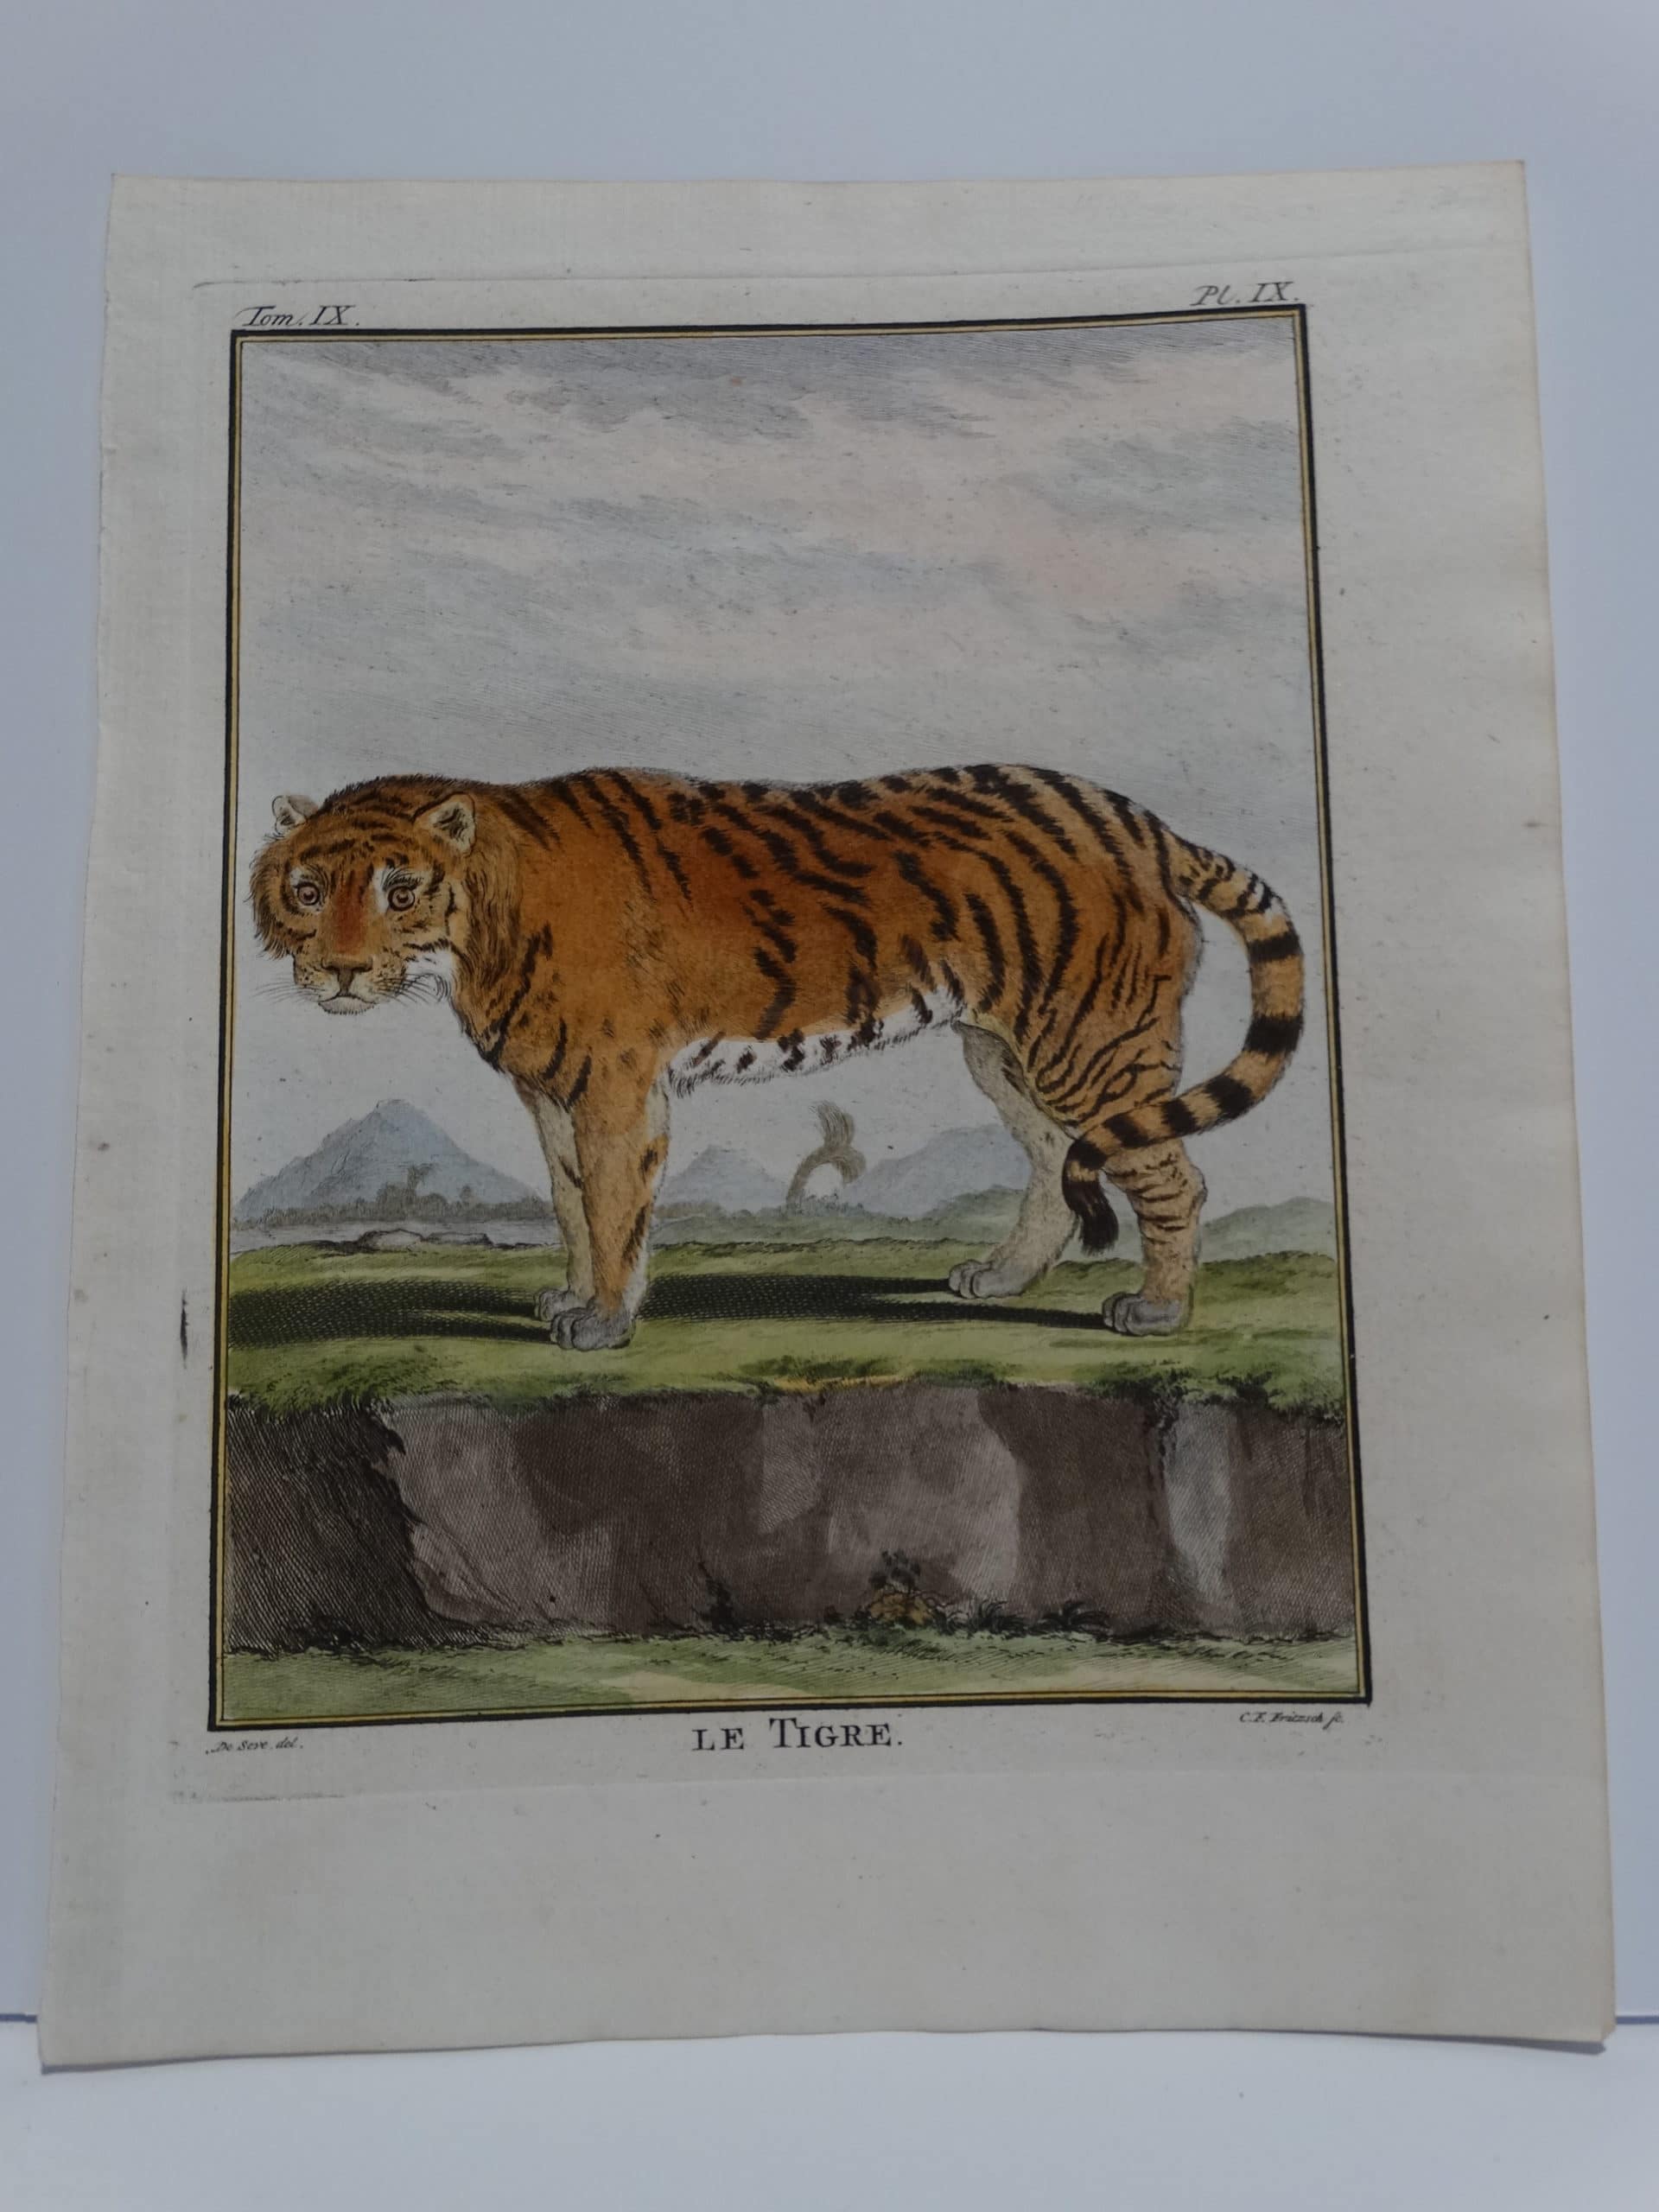 Excelption Tiger engraving from the 1700's. Compte de Buffon made sure the animal's expression was life-like and friendly looking, in nature.